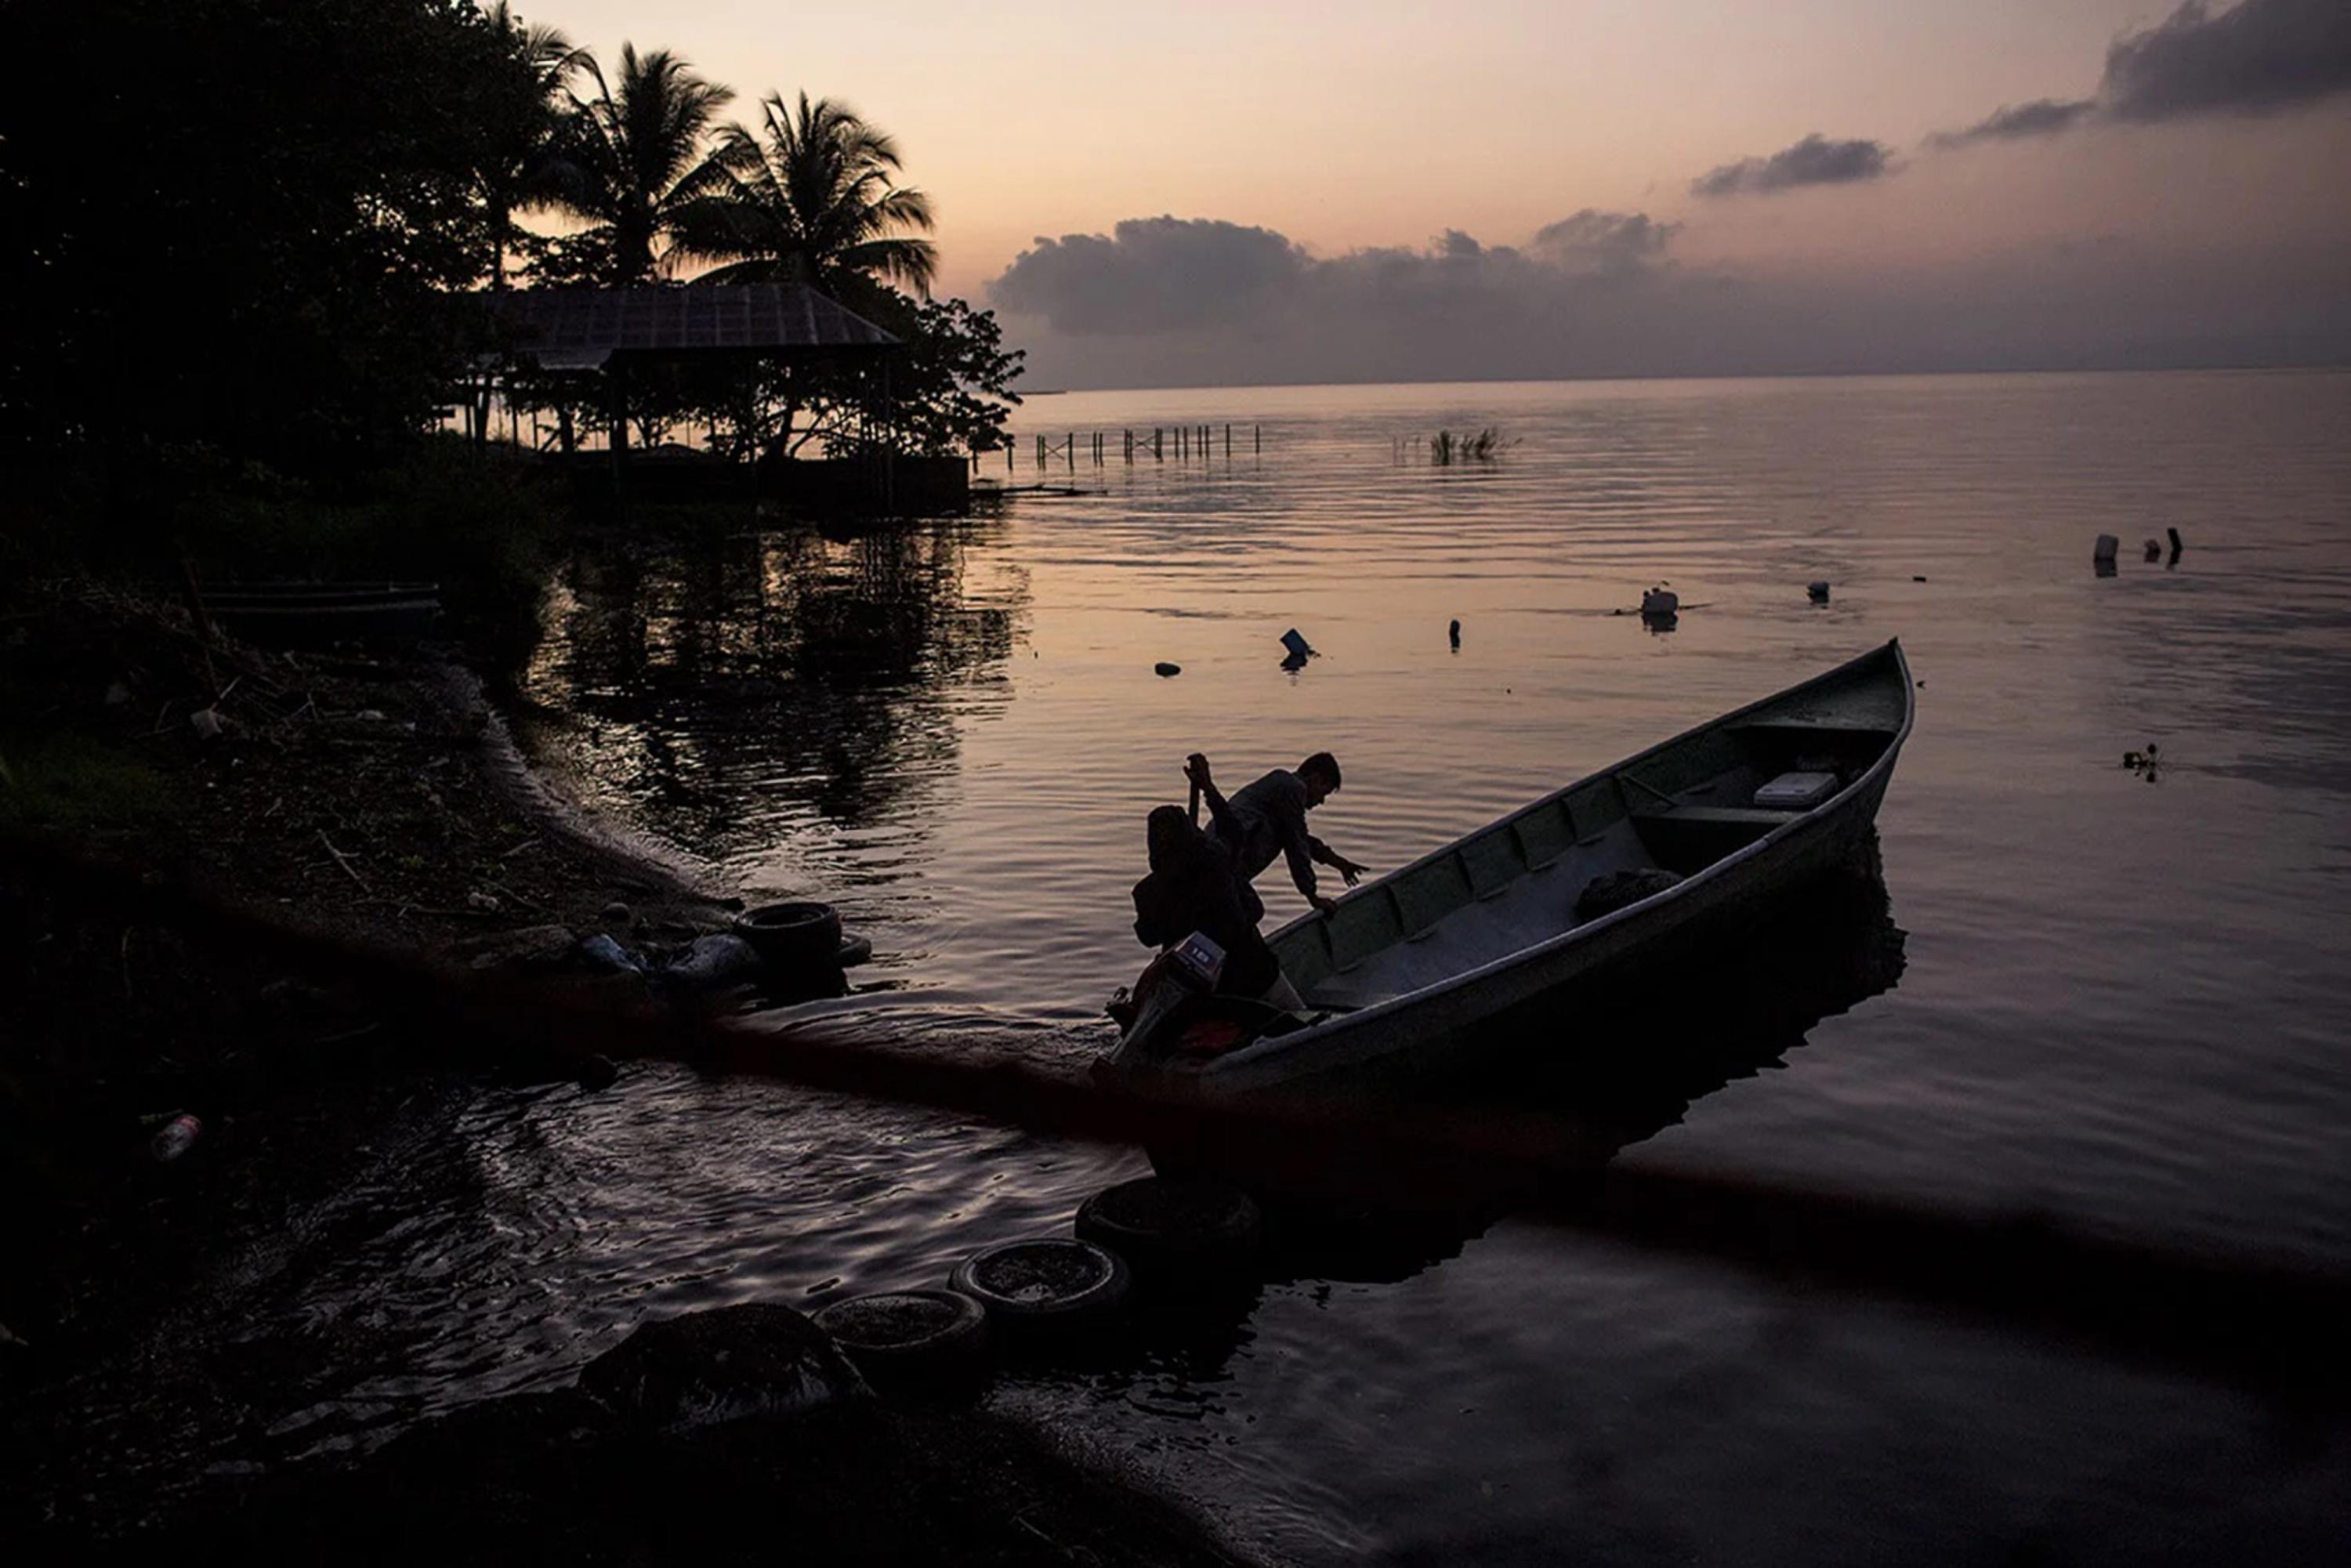 Fishermen leave for work on the lake of El Estor, in the early hours of Oct. 28, 2021. Q